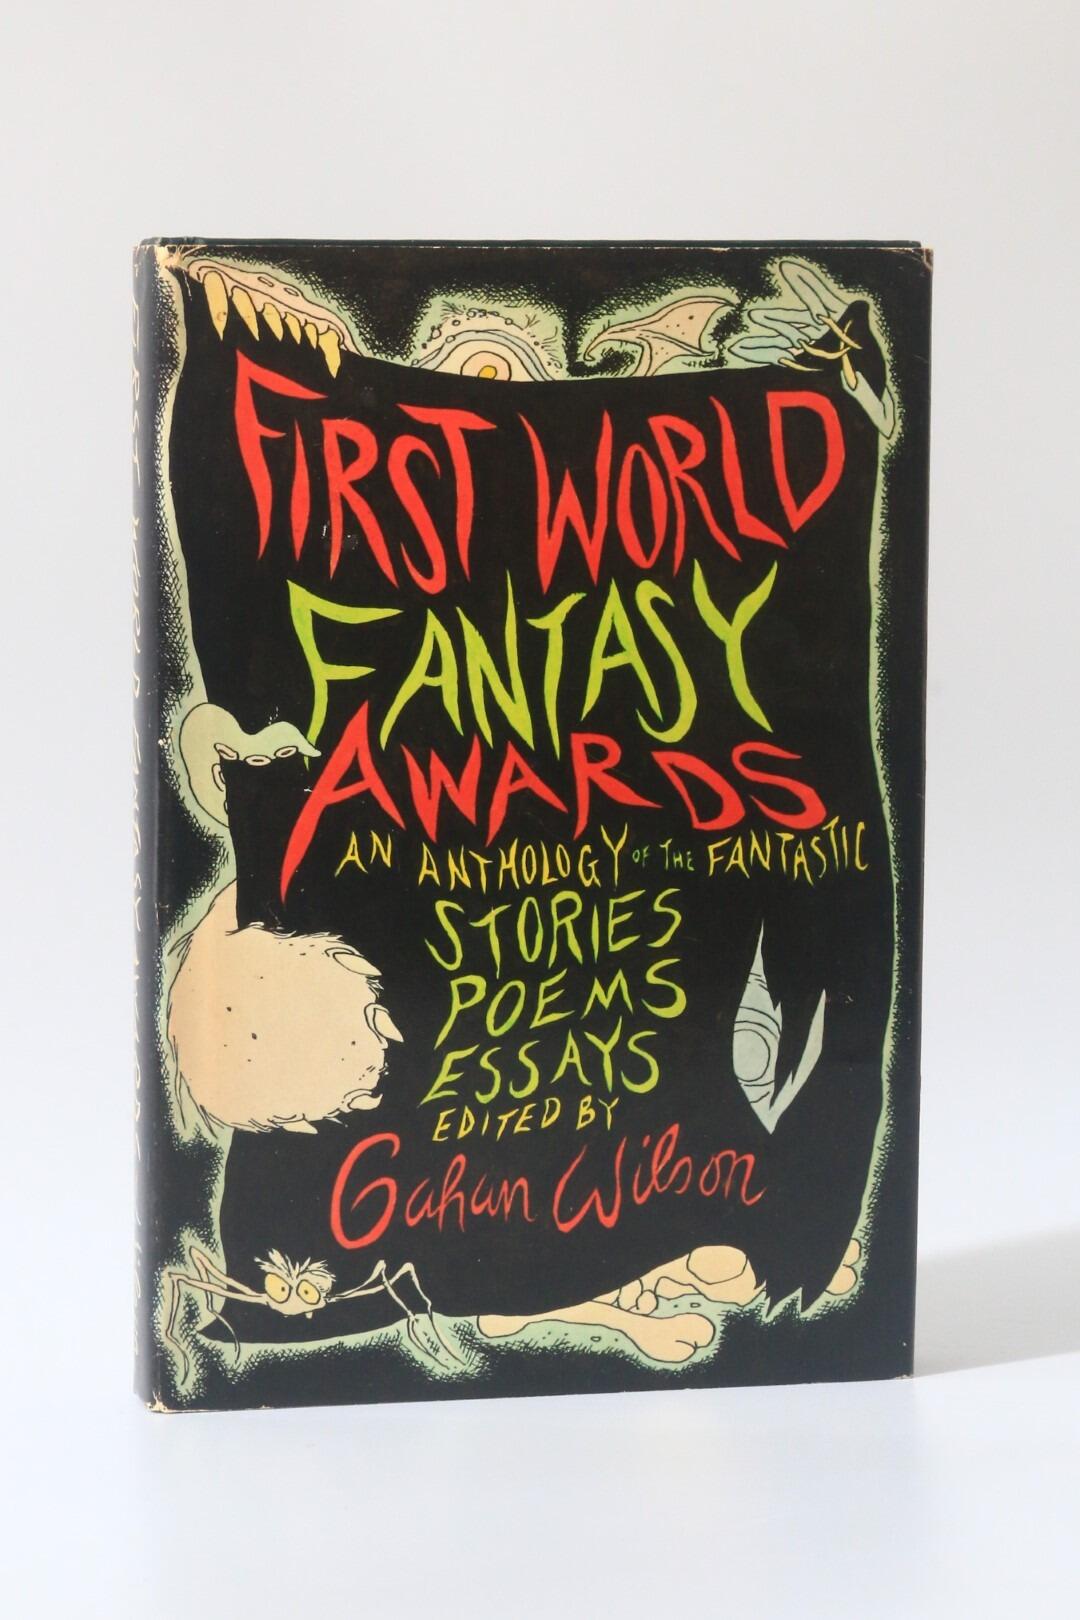 Gahan Wilson [ed] - First World Fantasy Awards: An Anthology of the Fantastic: Stories, Poems, Essays - Doubleday, 1977, First Edition.